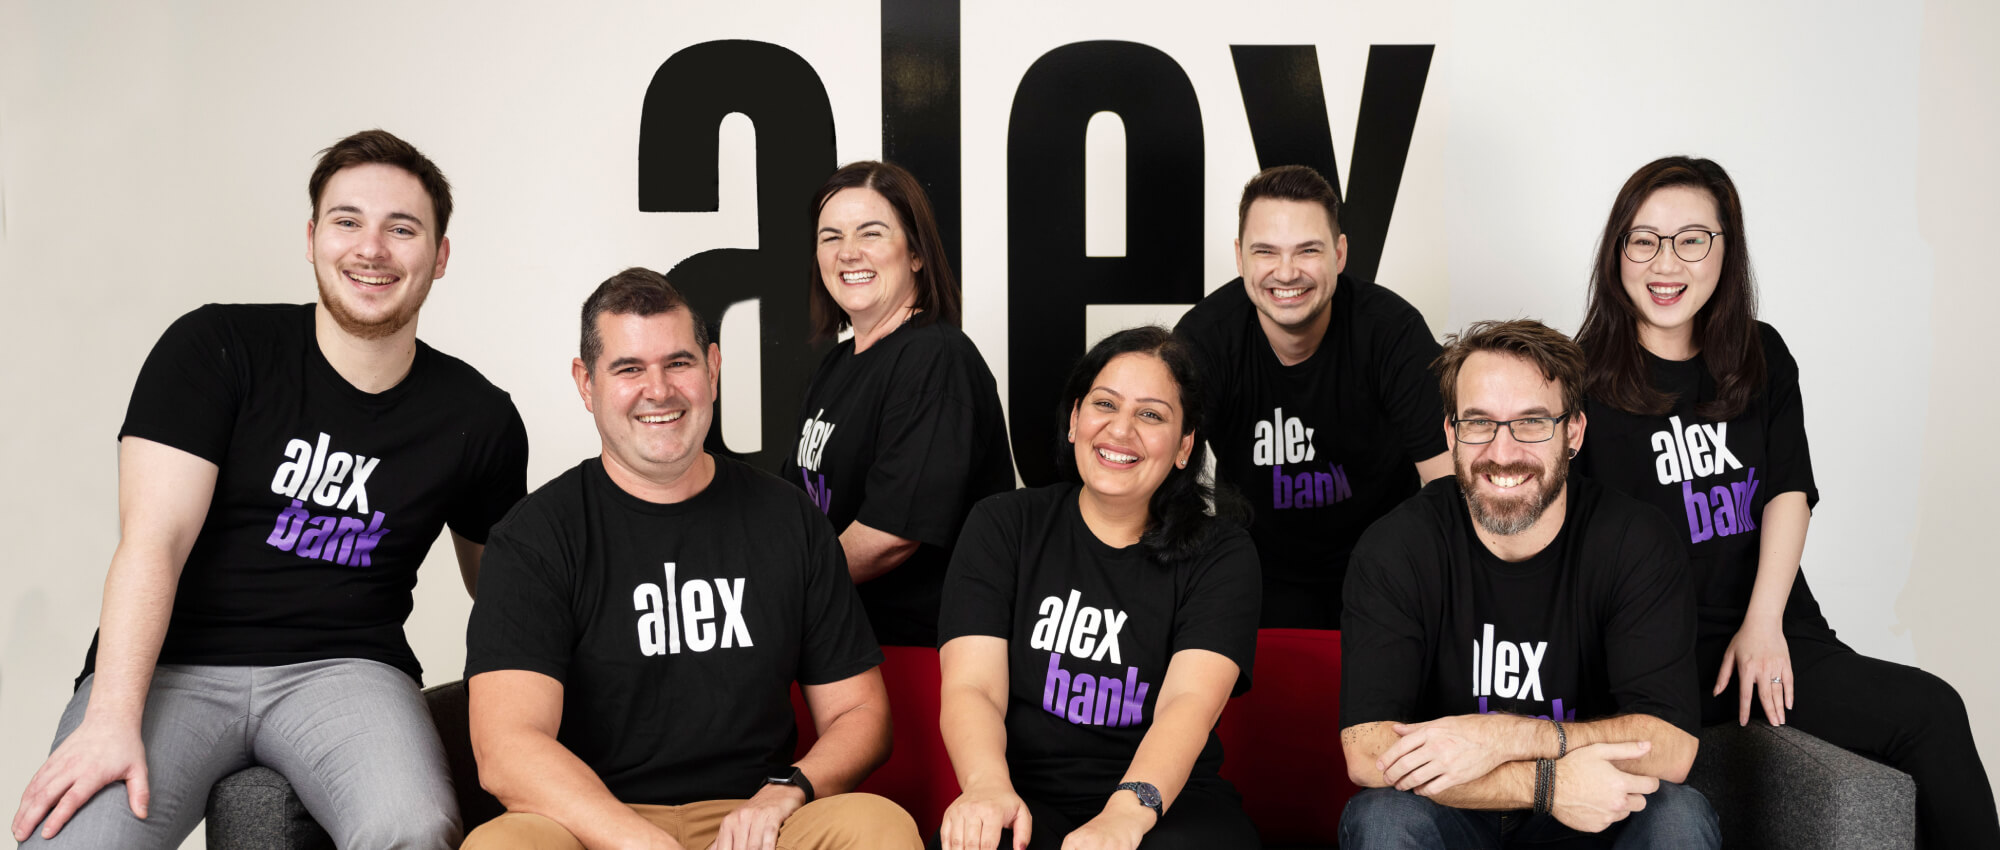 A group of Alex staff members